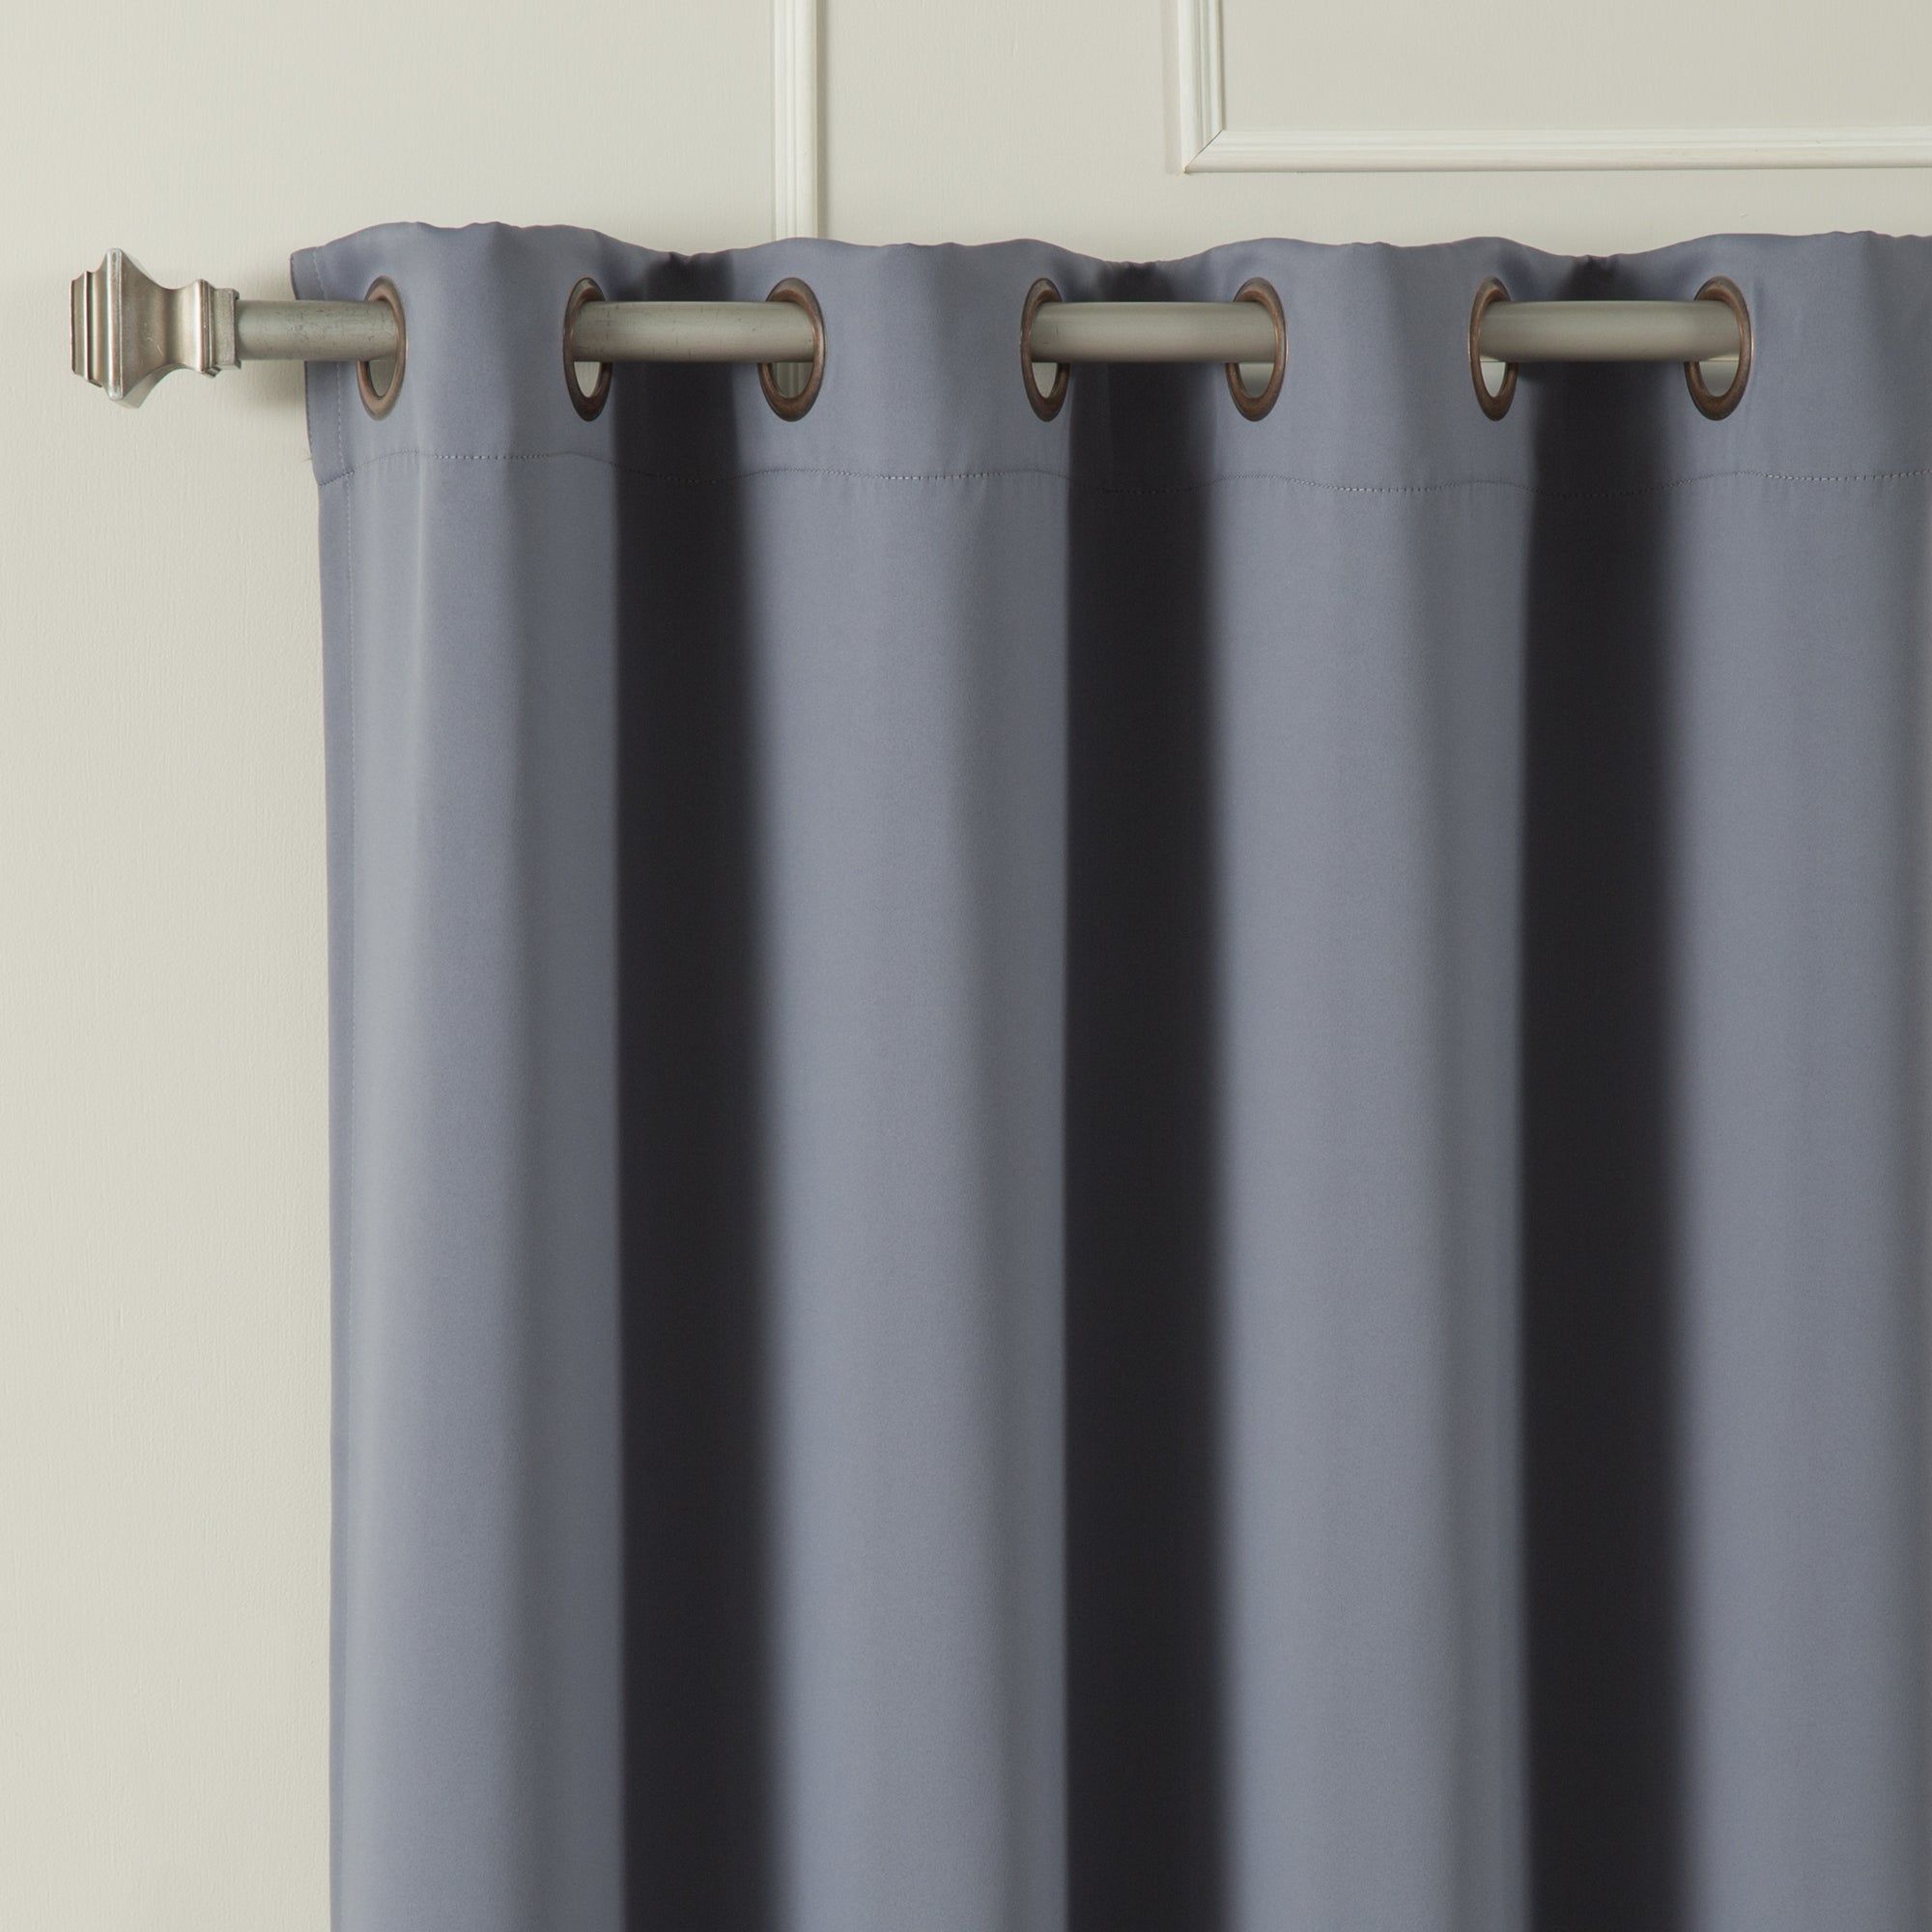 Aurora Home Antique Silver Grommet Top Thermal Insulated Blackout Curtain  Panel Pair Within Antique Silver Grommet Top Thermal Insulated Blackout Curtain Panel Pairs (View 6 of 20)